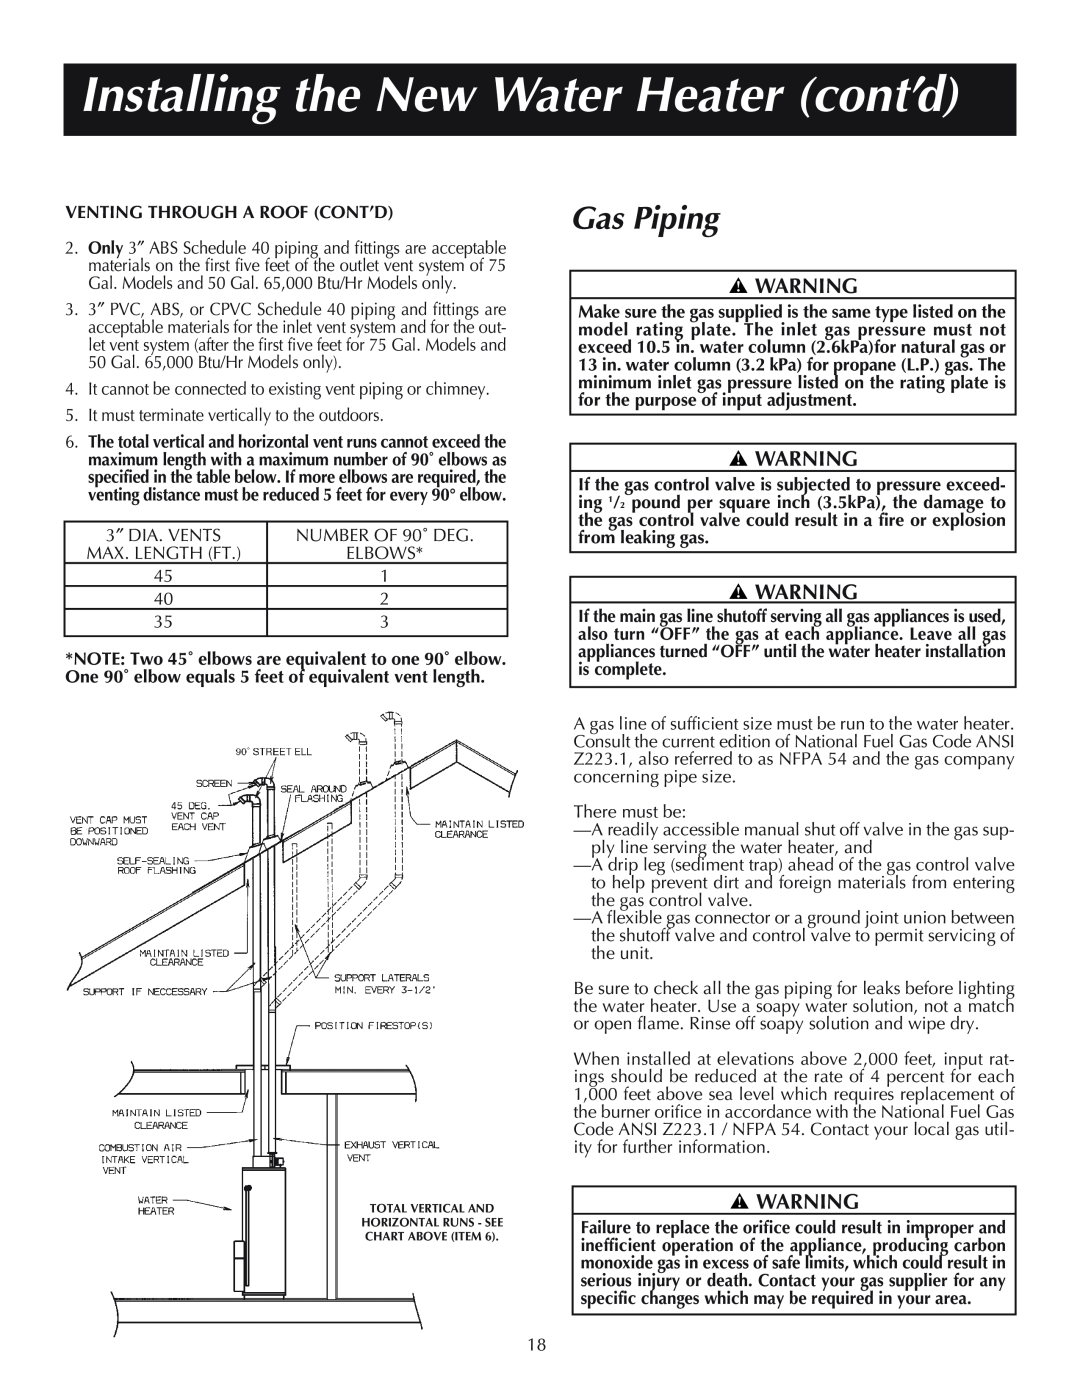 Reliance Water Heaters 606, 11-03, 184333-001 instruction manual Gas Piping, Installing the New Water Heater cont’d 